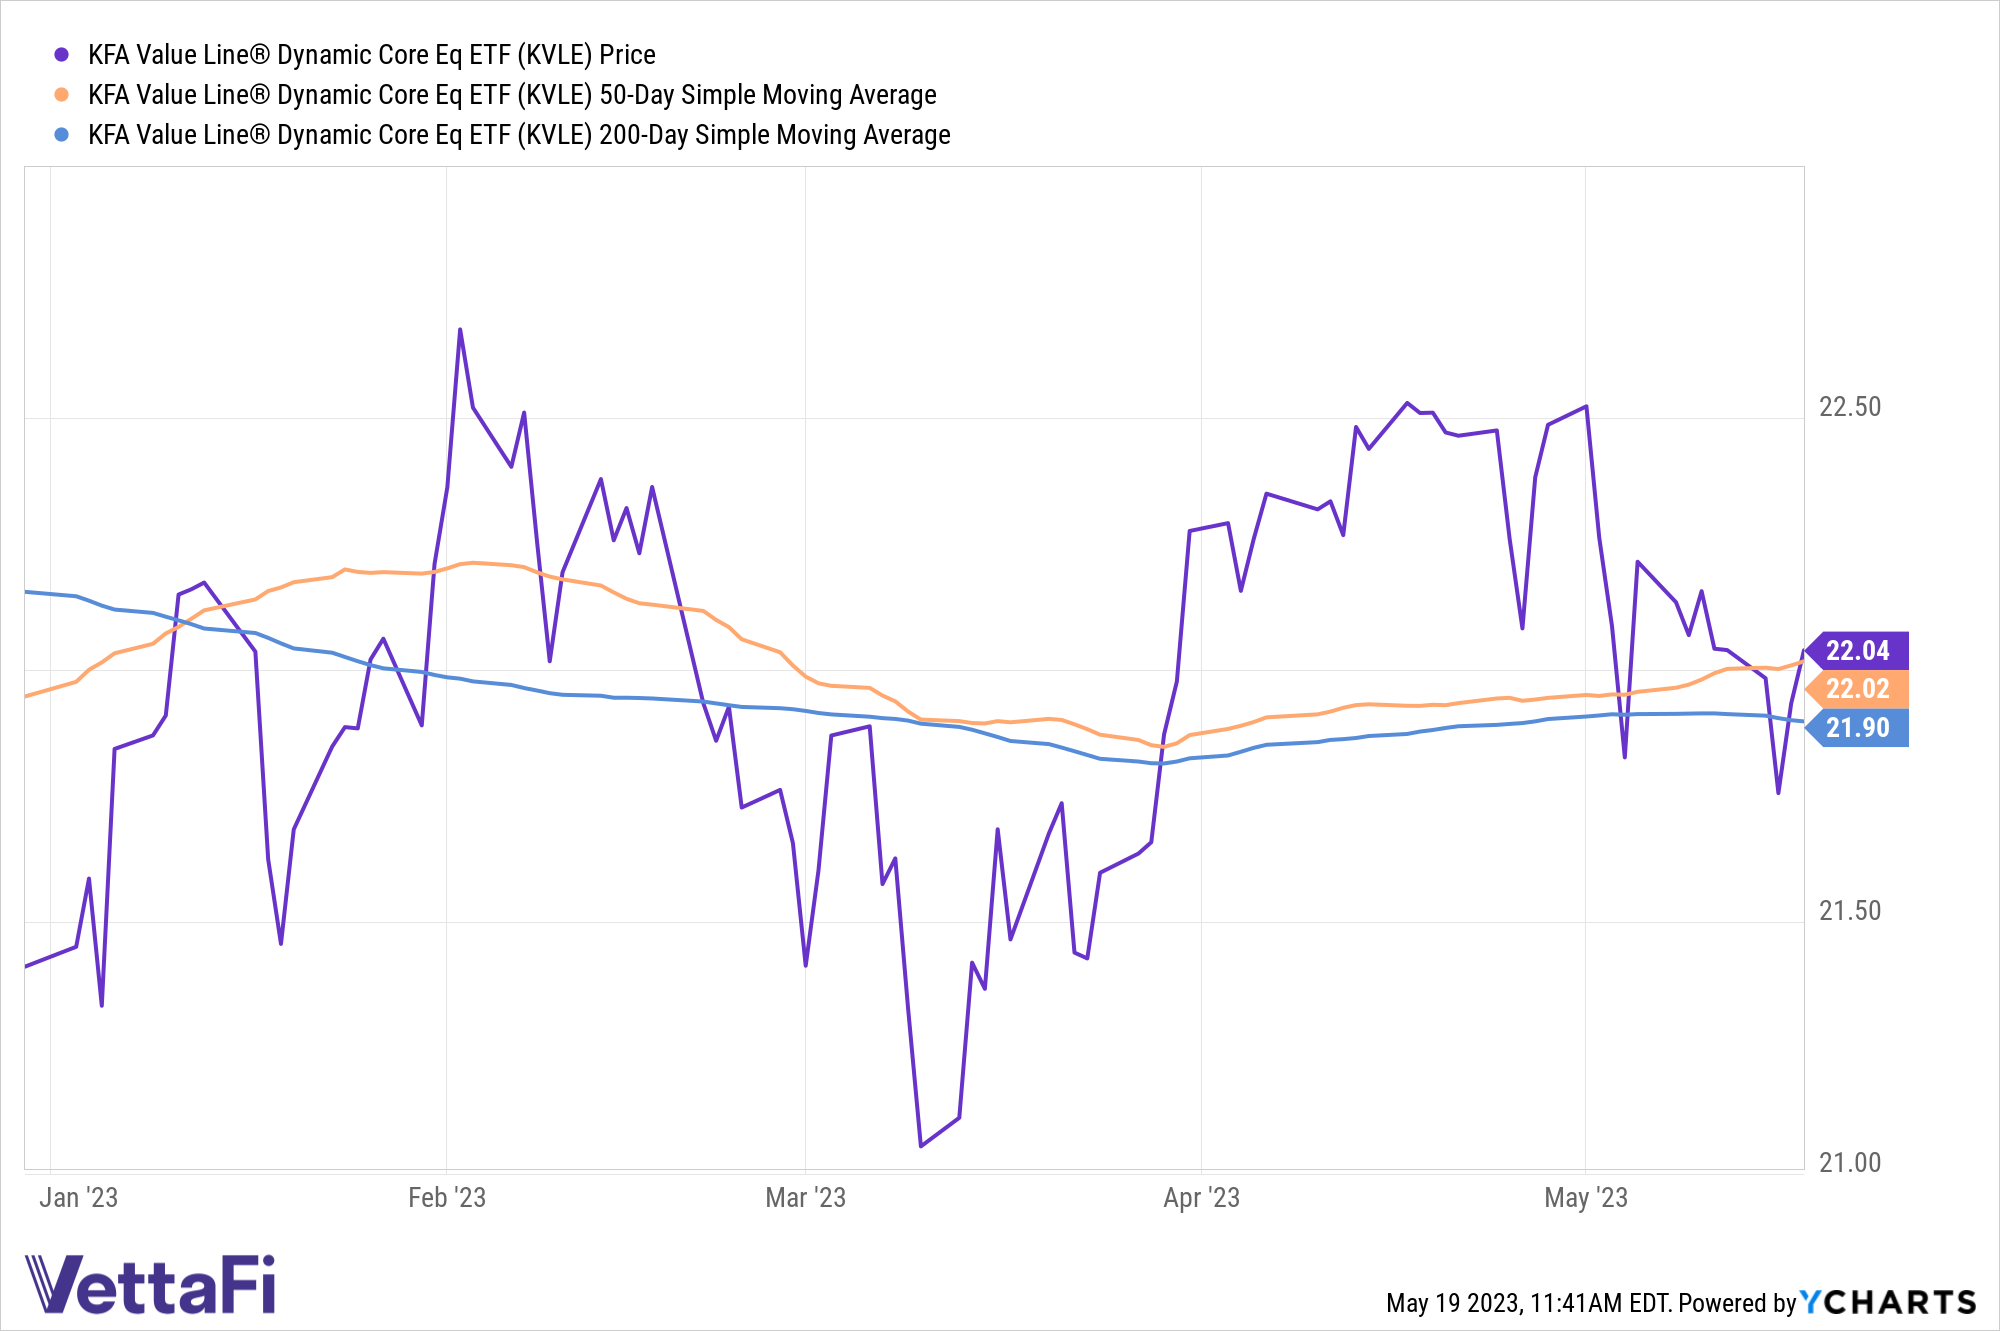 Graph of KVLE's price performance YTD of 22.04 compared to 50-day SMA of 22.02 and 200-day SMA of 21.90